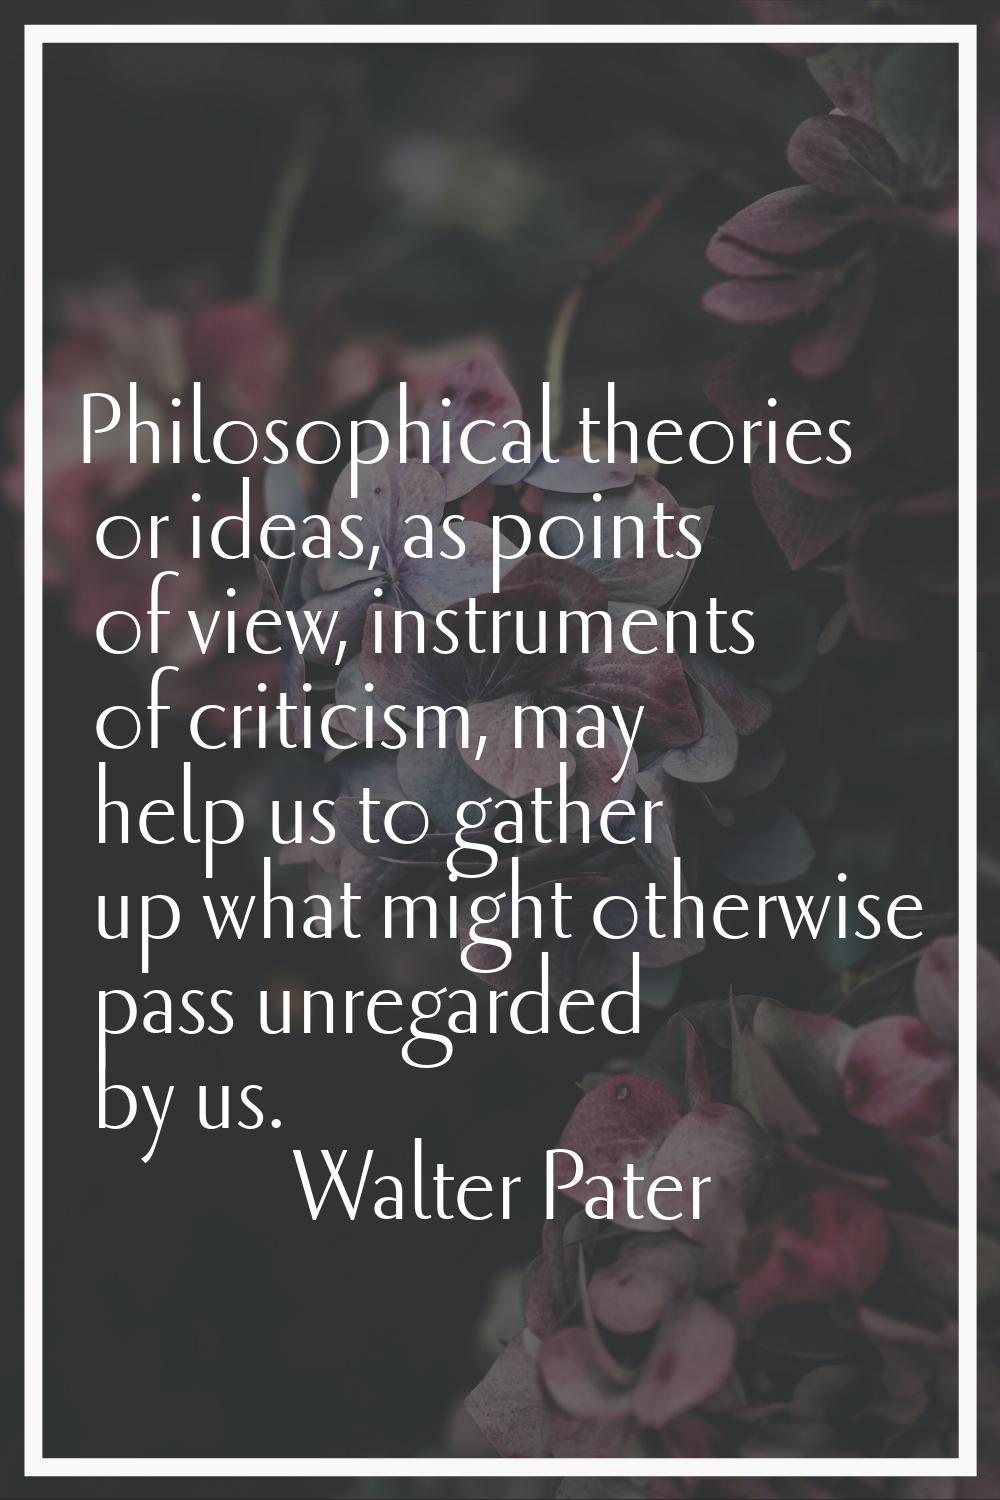 Philosophical theories or ideas, as points of view, instruments of criticism, may help us to gather